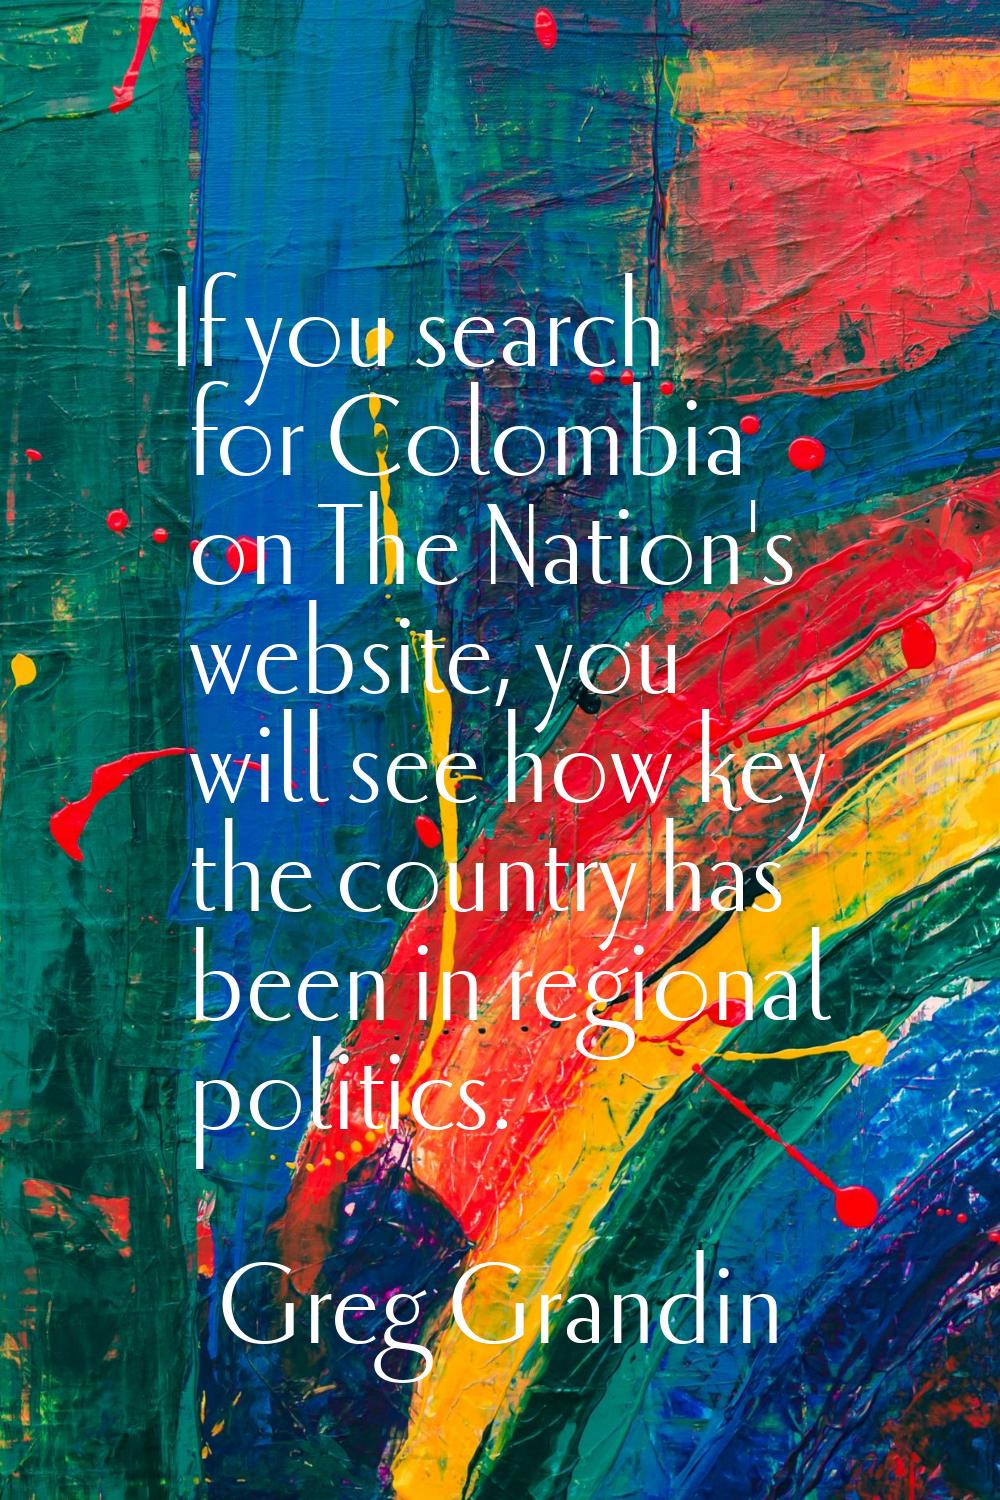 If you search for Colombia on The Nation's website, you will see how key the country has been in re